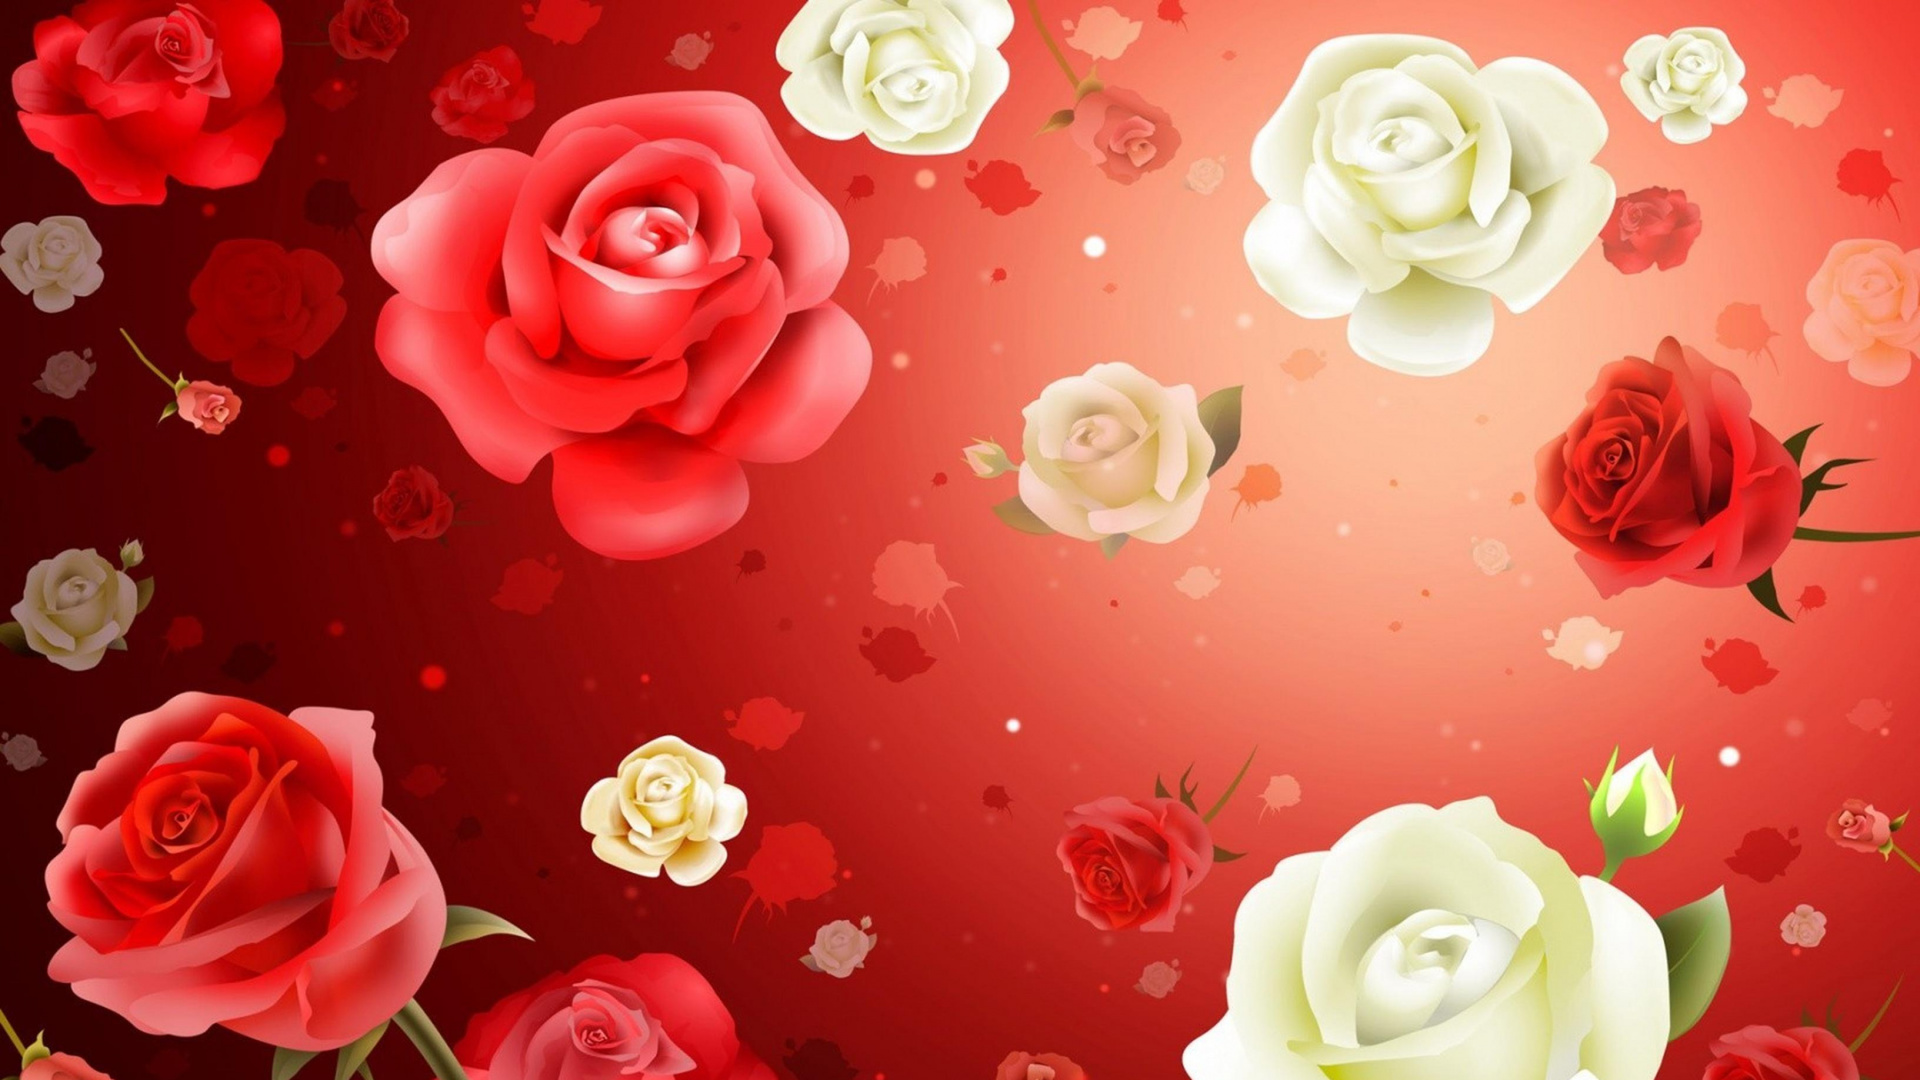 Roses Blanches et Roses Sur Surface Rouge. Wallpaper in 1920x1080 Resolution